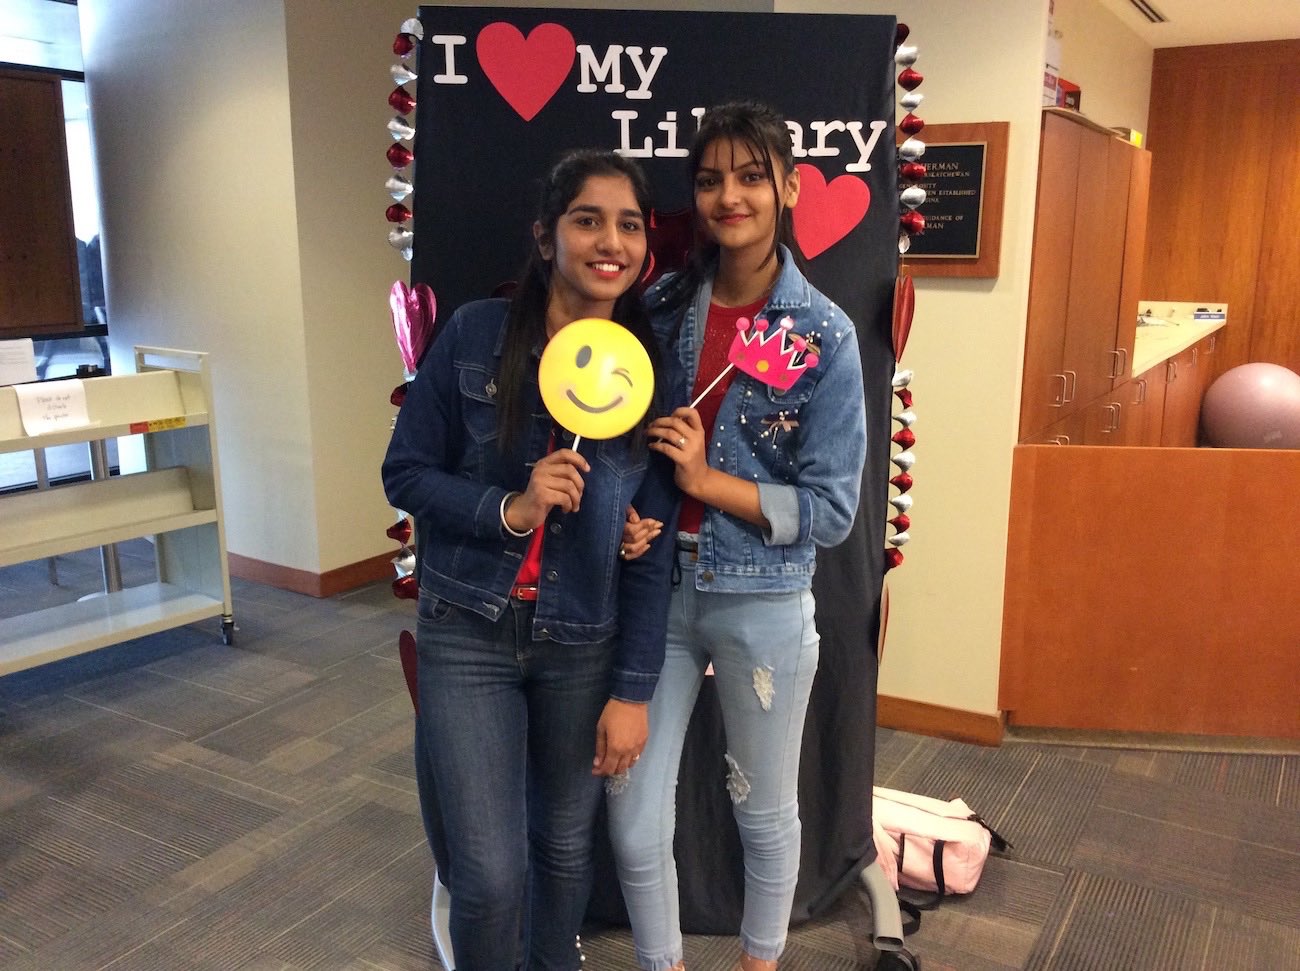 Two students with long black hair, wearing jeans and jean jackets, pose in front of the I love my Library backdrop each holding up a prop on a stick. The student on the left is holding a winking smiley face and the one on the right is holding a pink crown.